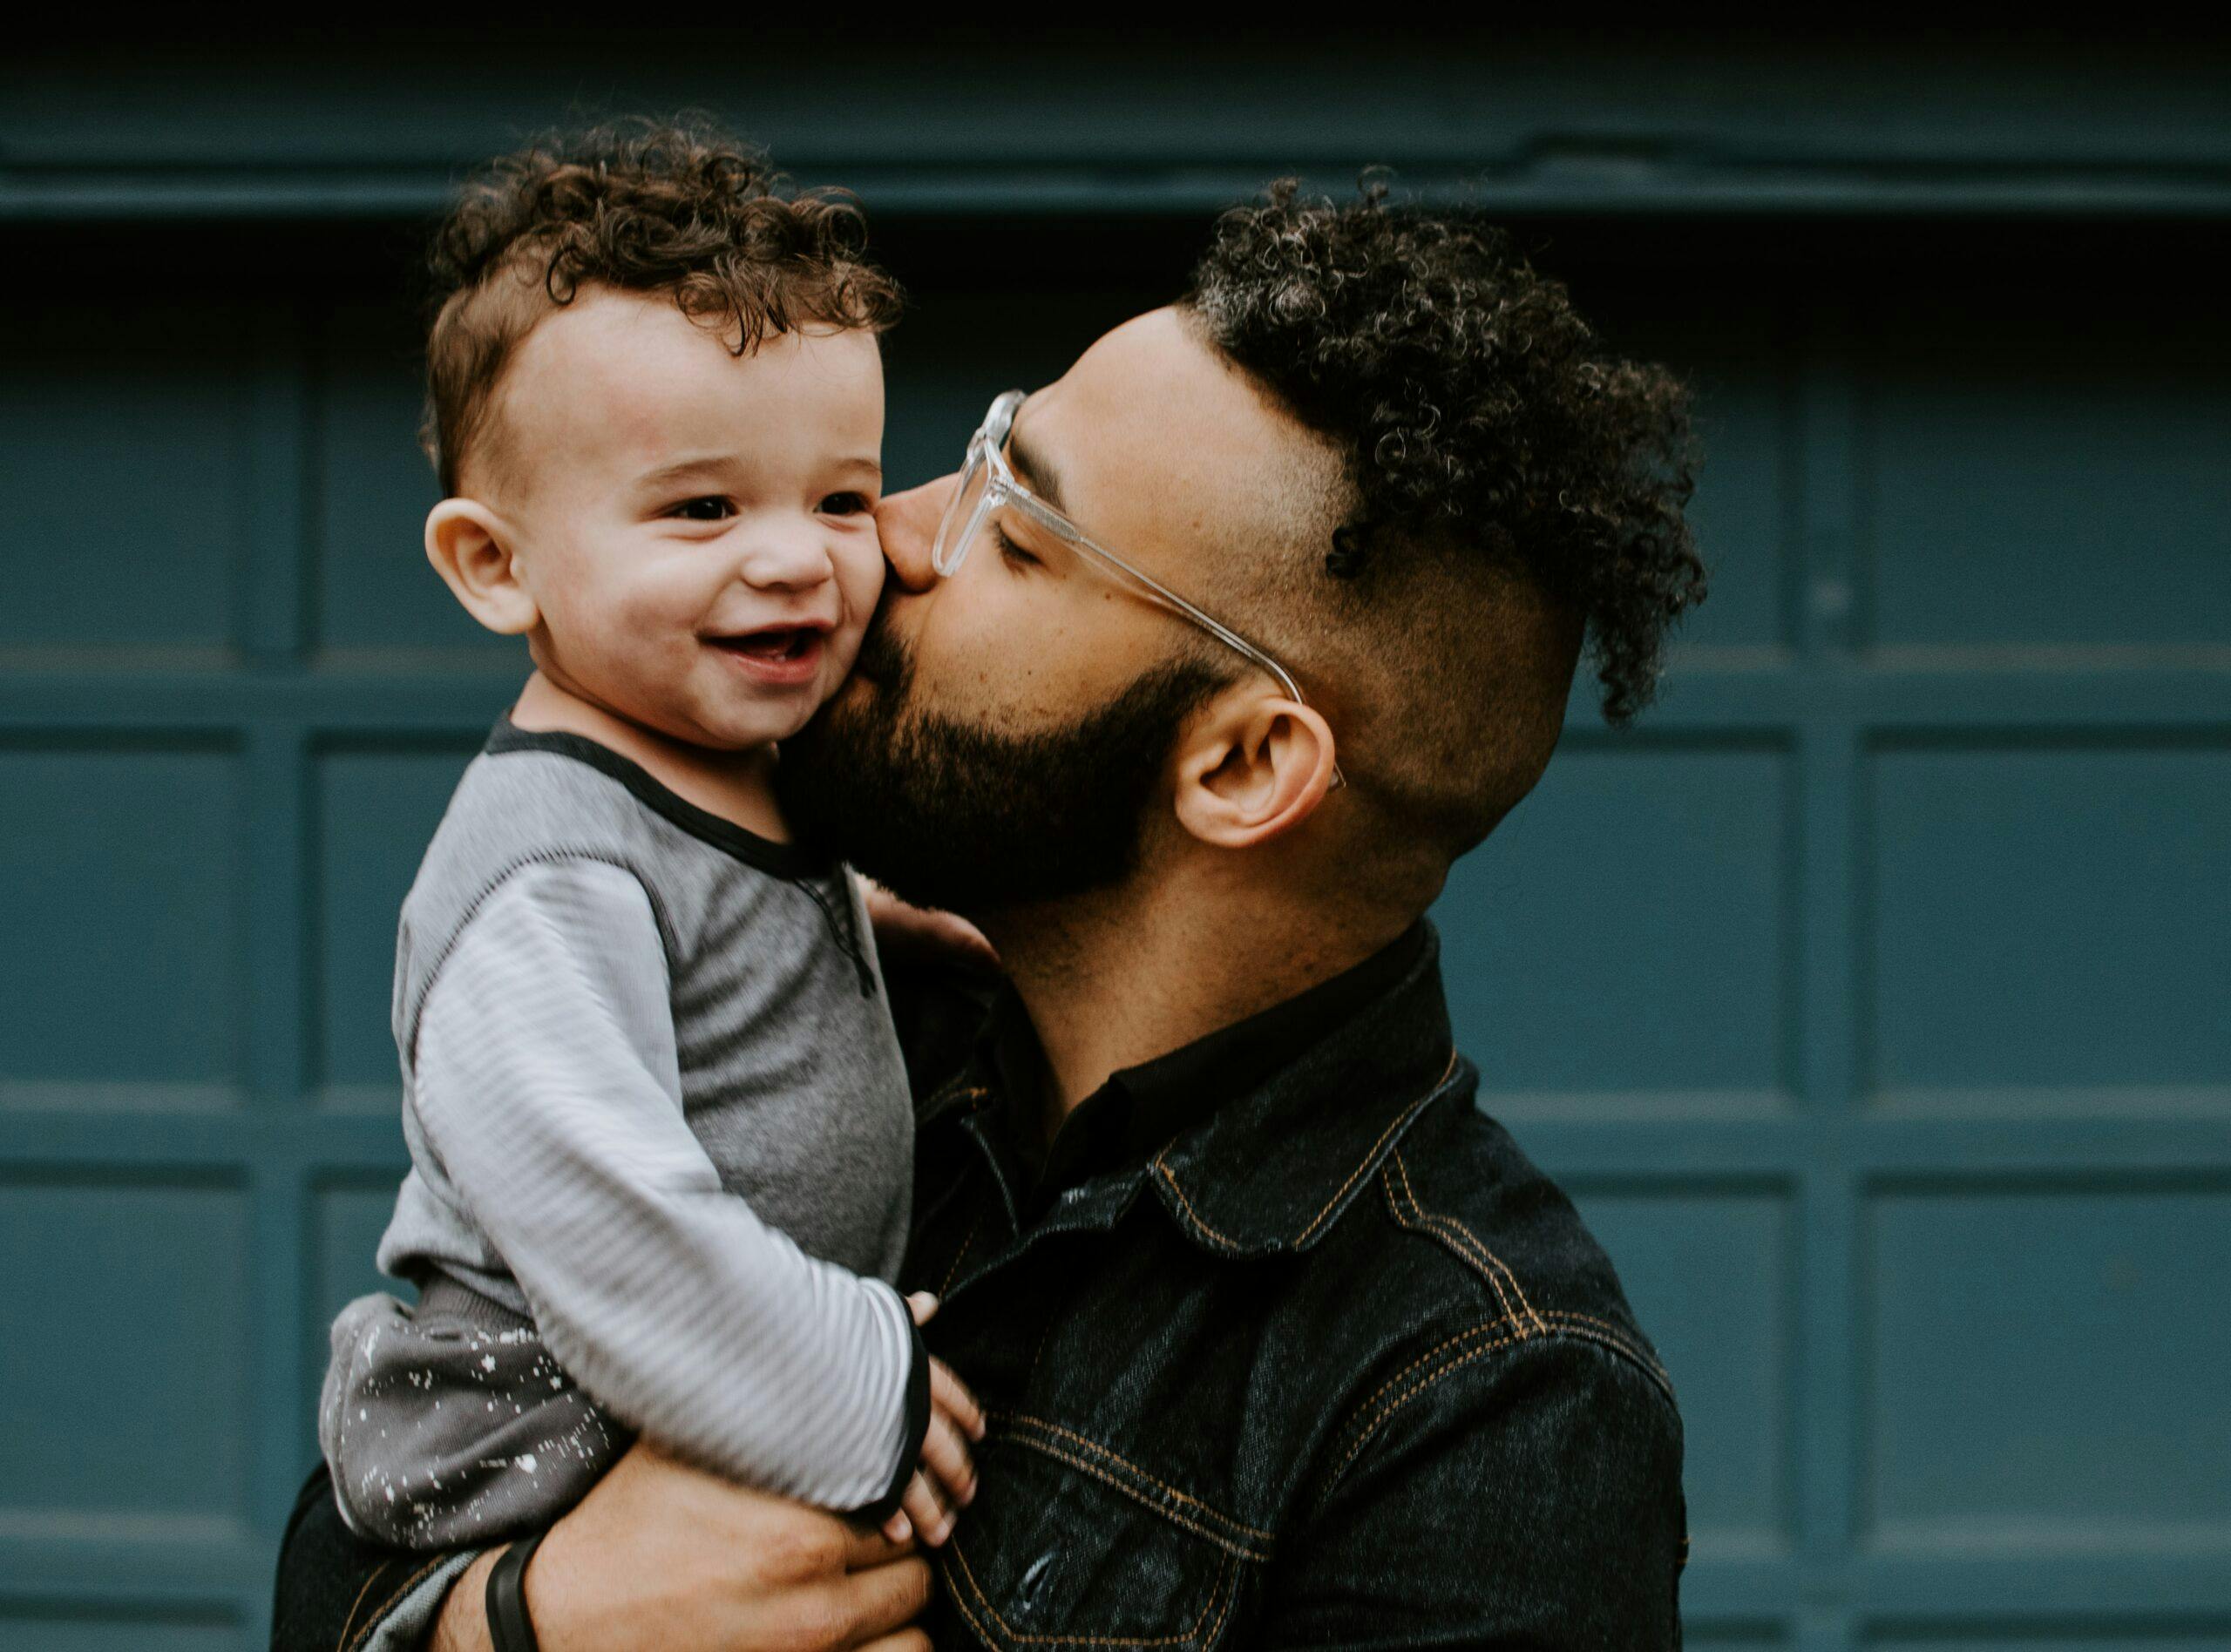 A man kissing his child on the cheek